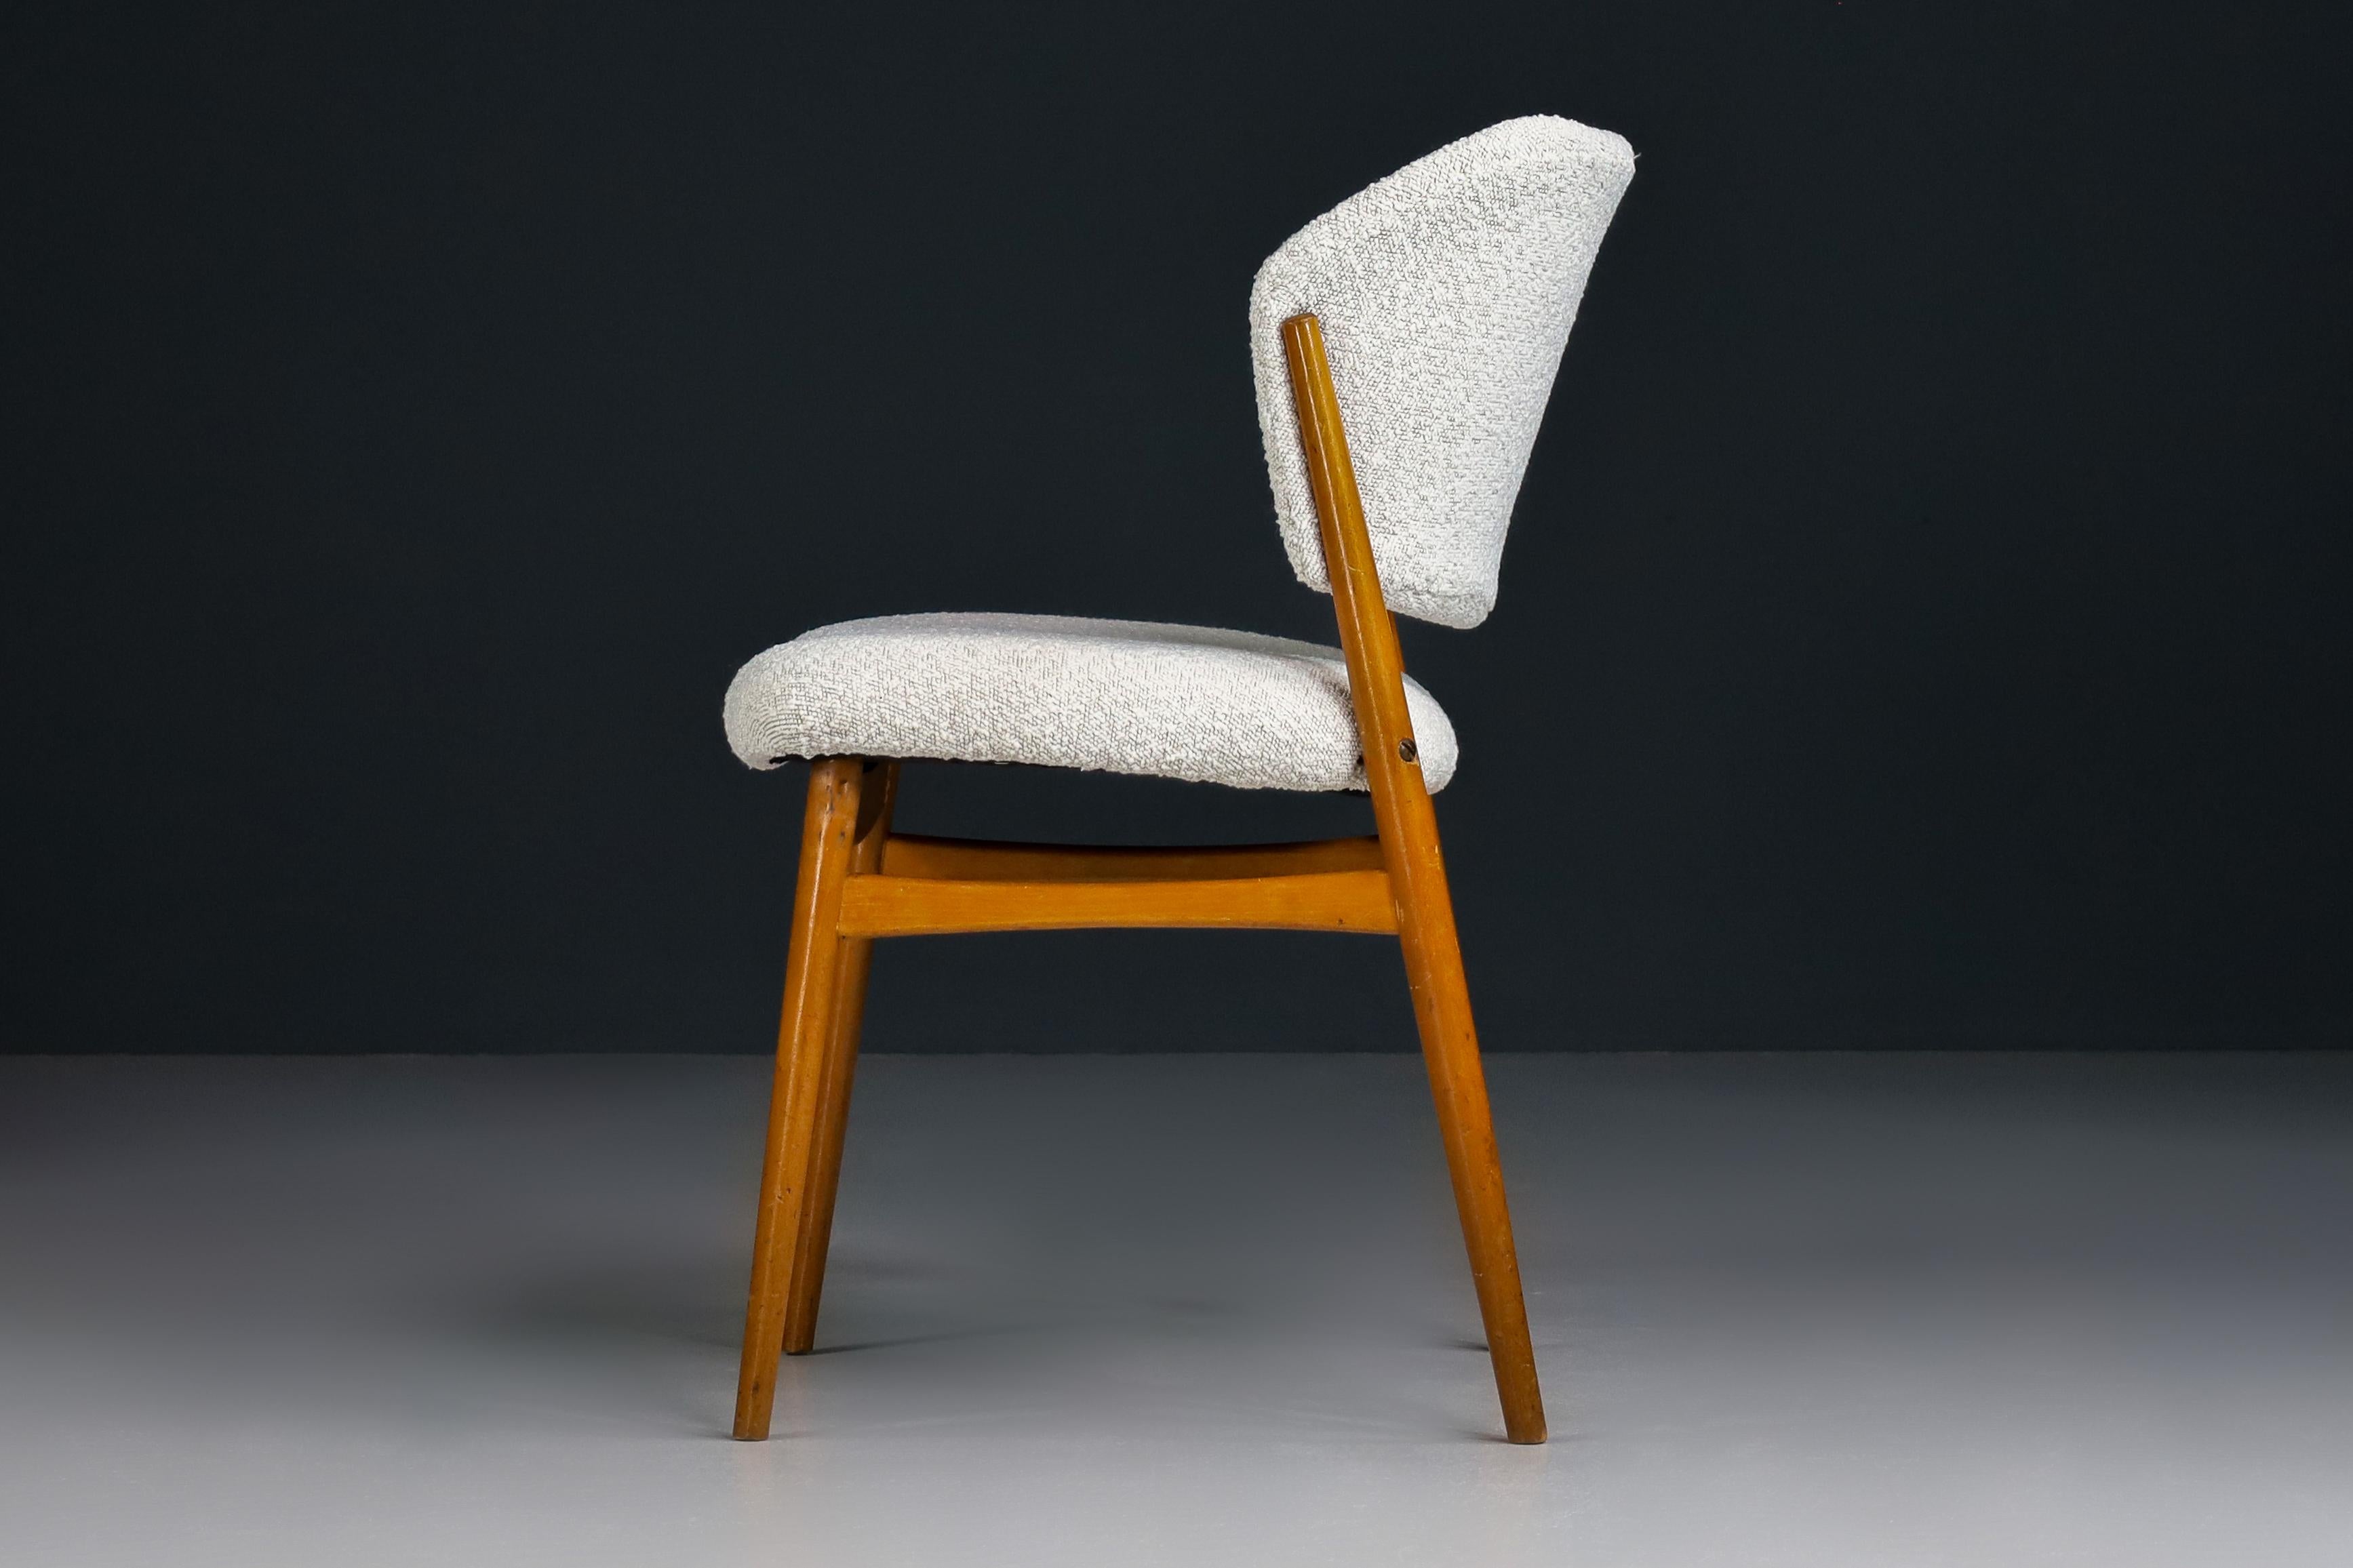 20th Century Mid-Century Modern Dining Chairs in New Bouclé Fabric by Spahn, Germany 1950s For Sale